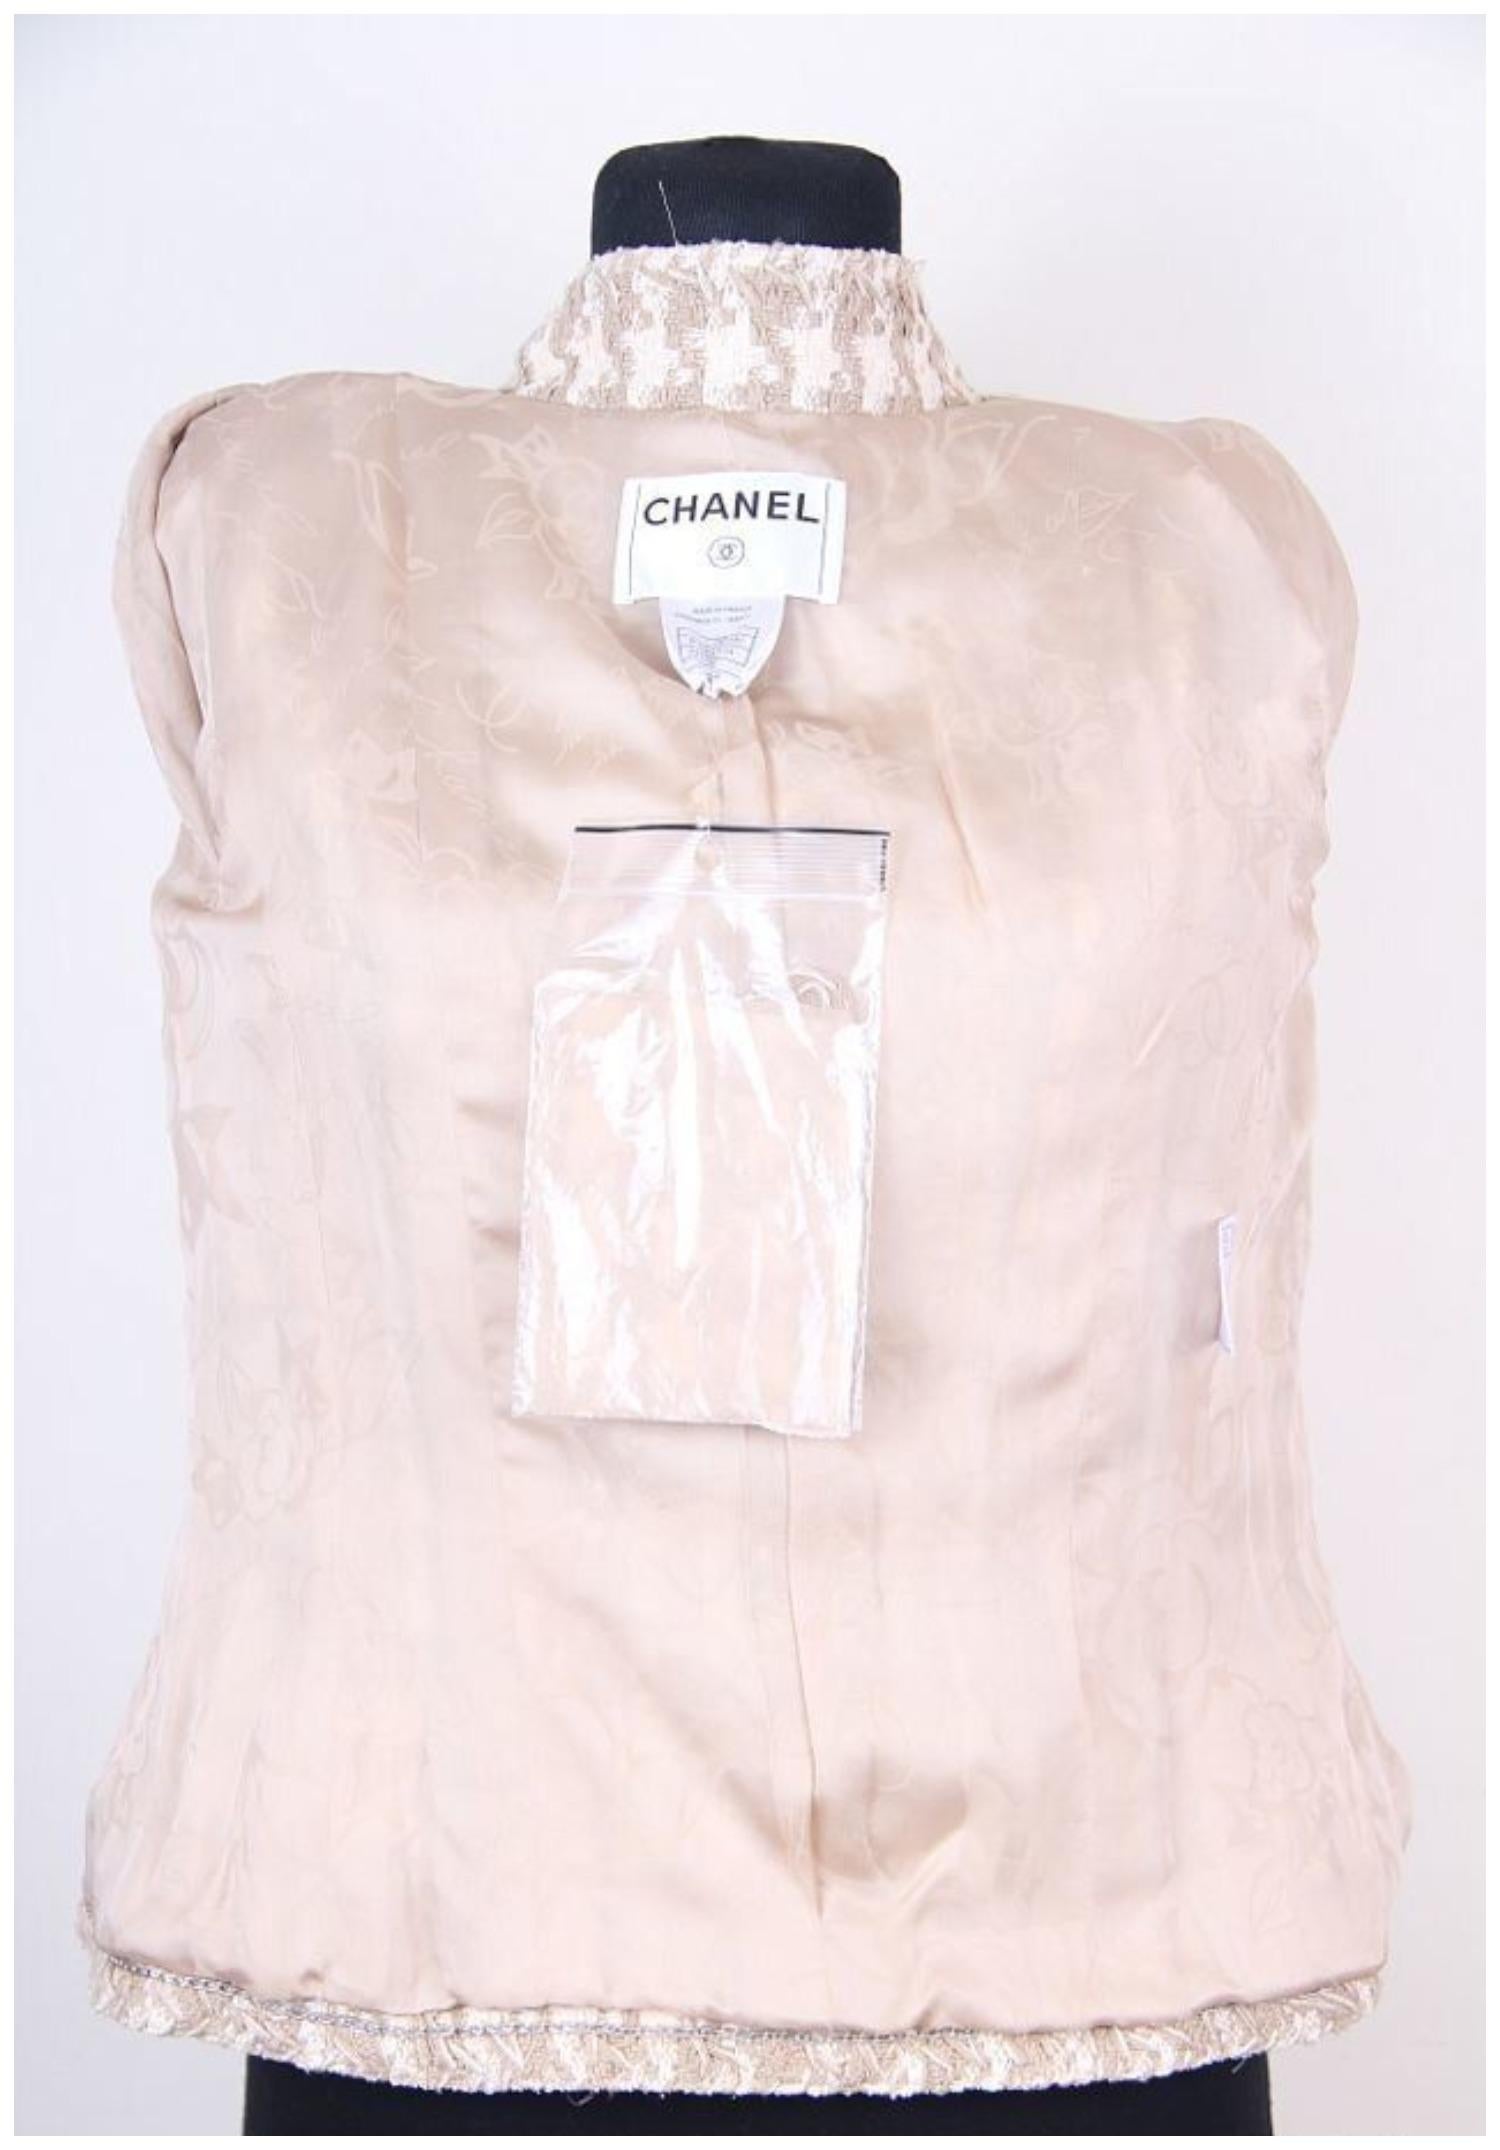 Chanel & Karl Lagerfeld 08P 2008 Beige/White Hound's-Tooth Tweed jacket 34 FR For Sale 1